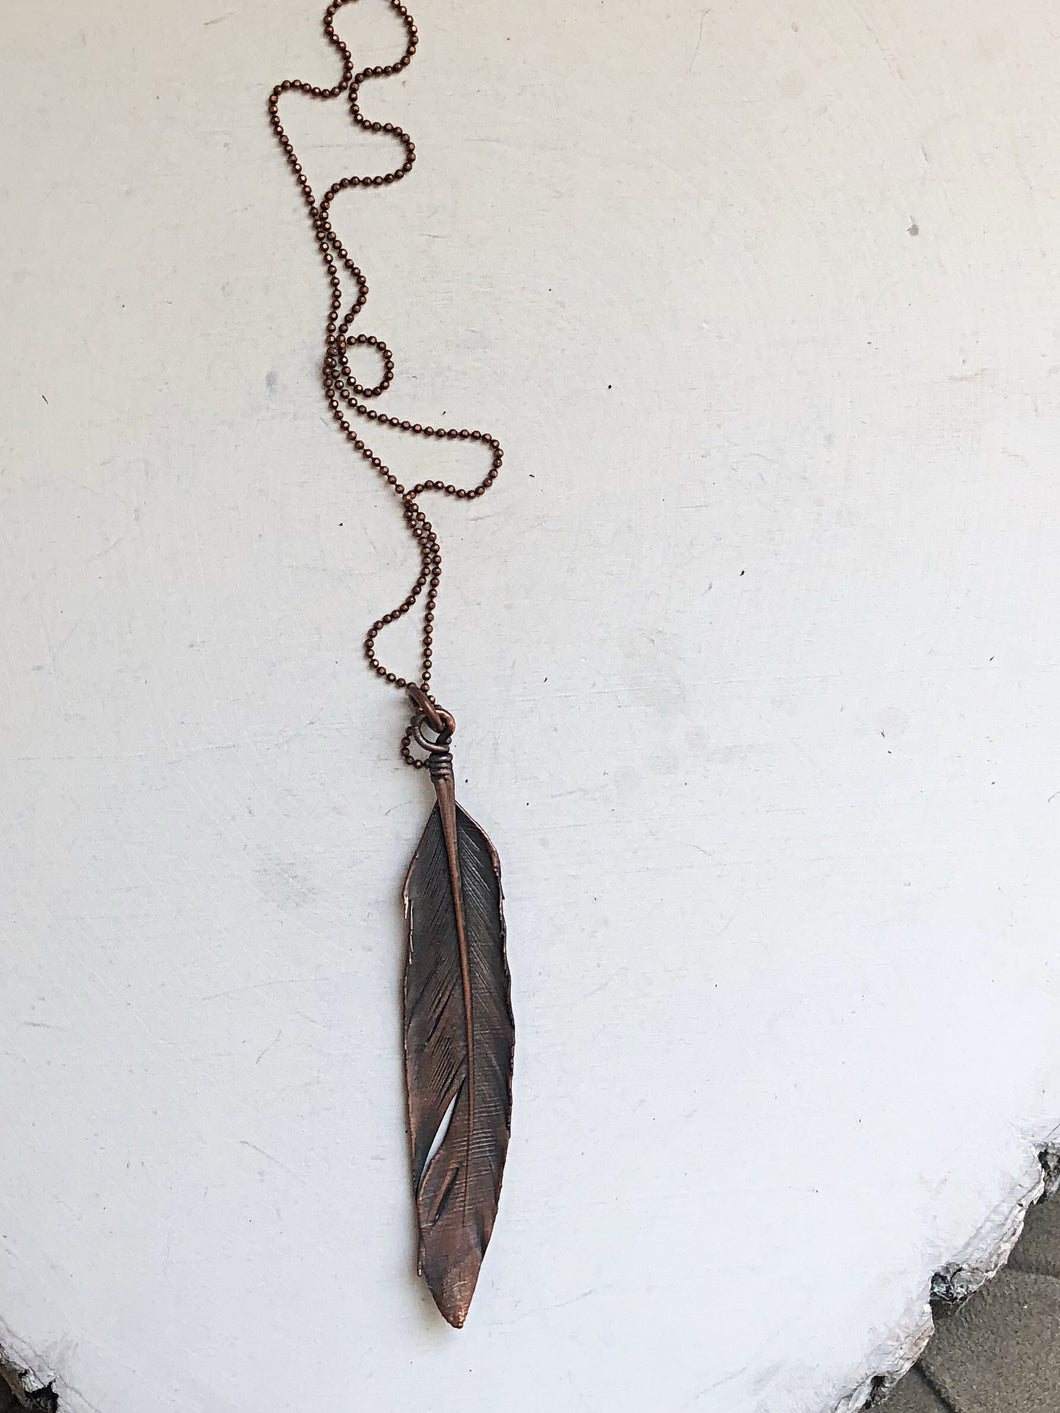 Electroformed Feather Necklace #2 - Ready to Ship (5/17 Update)